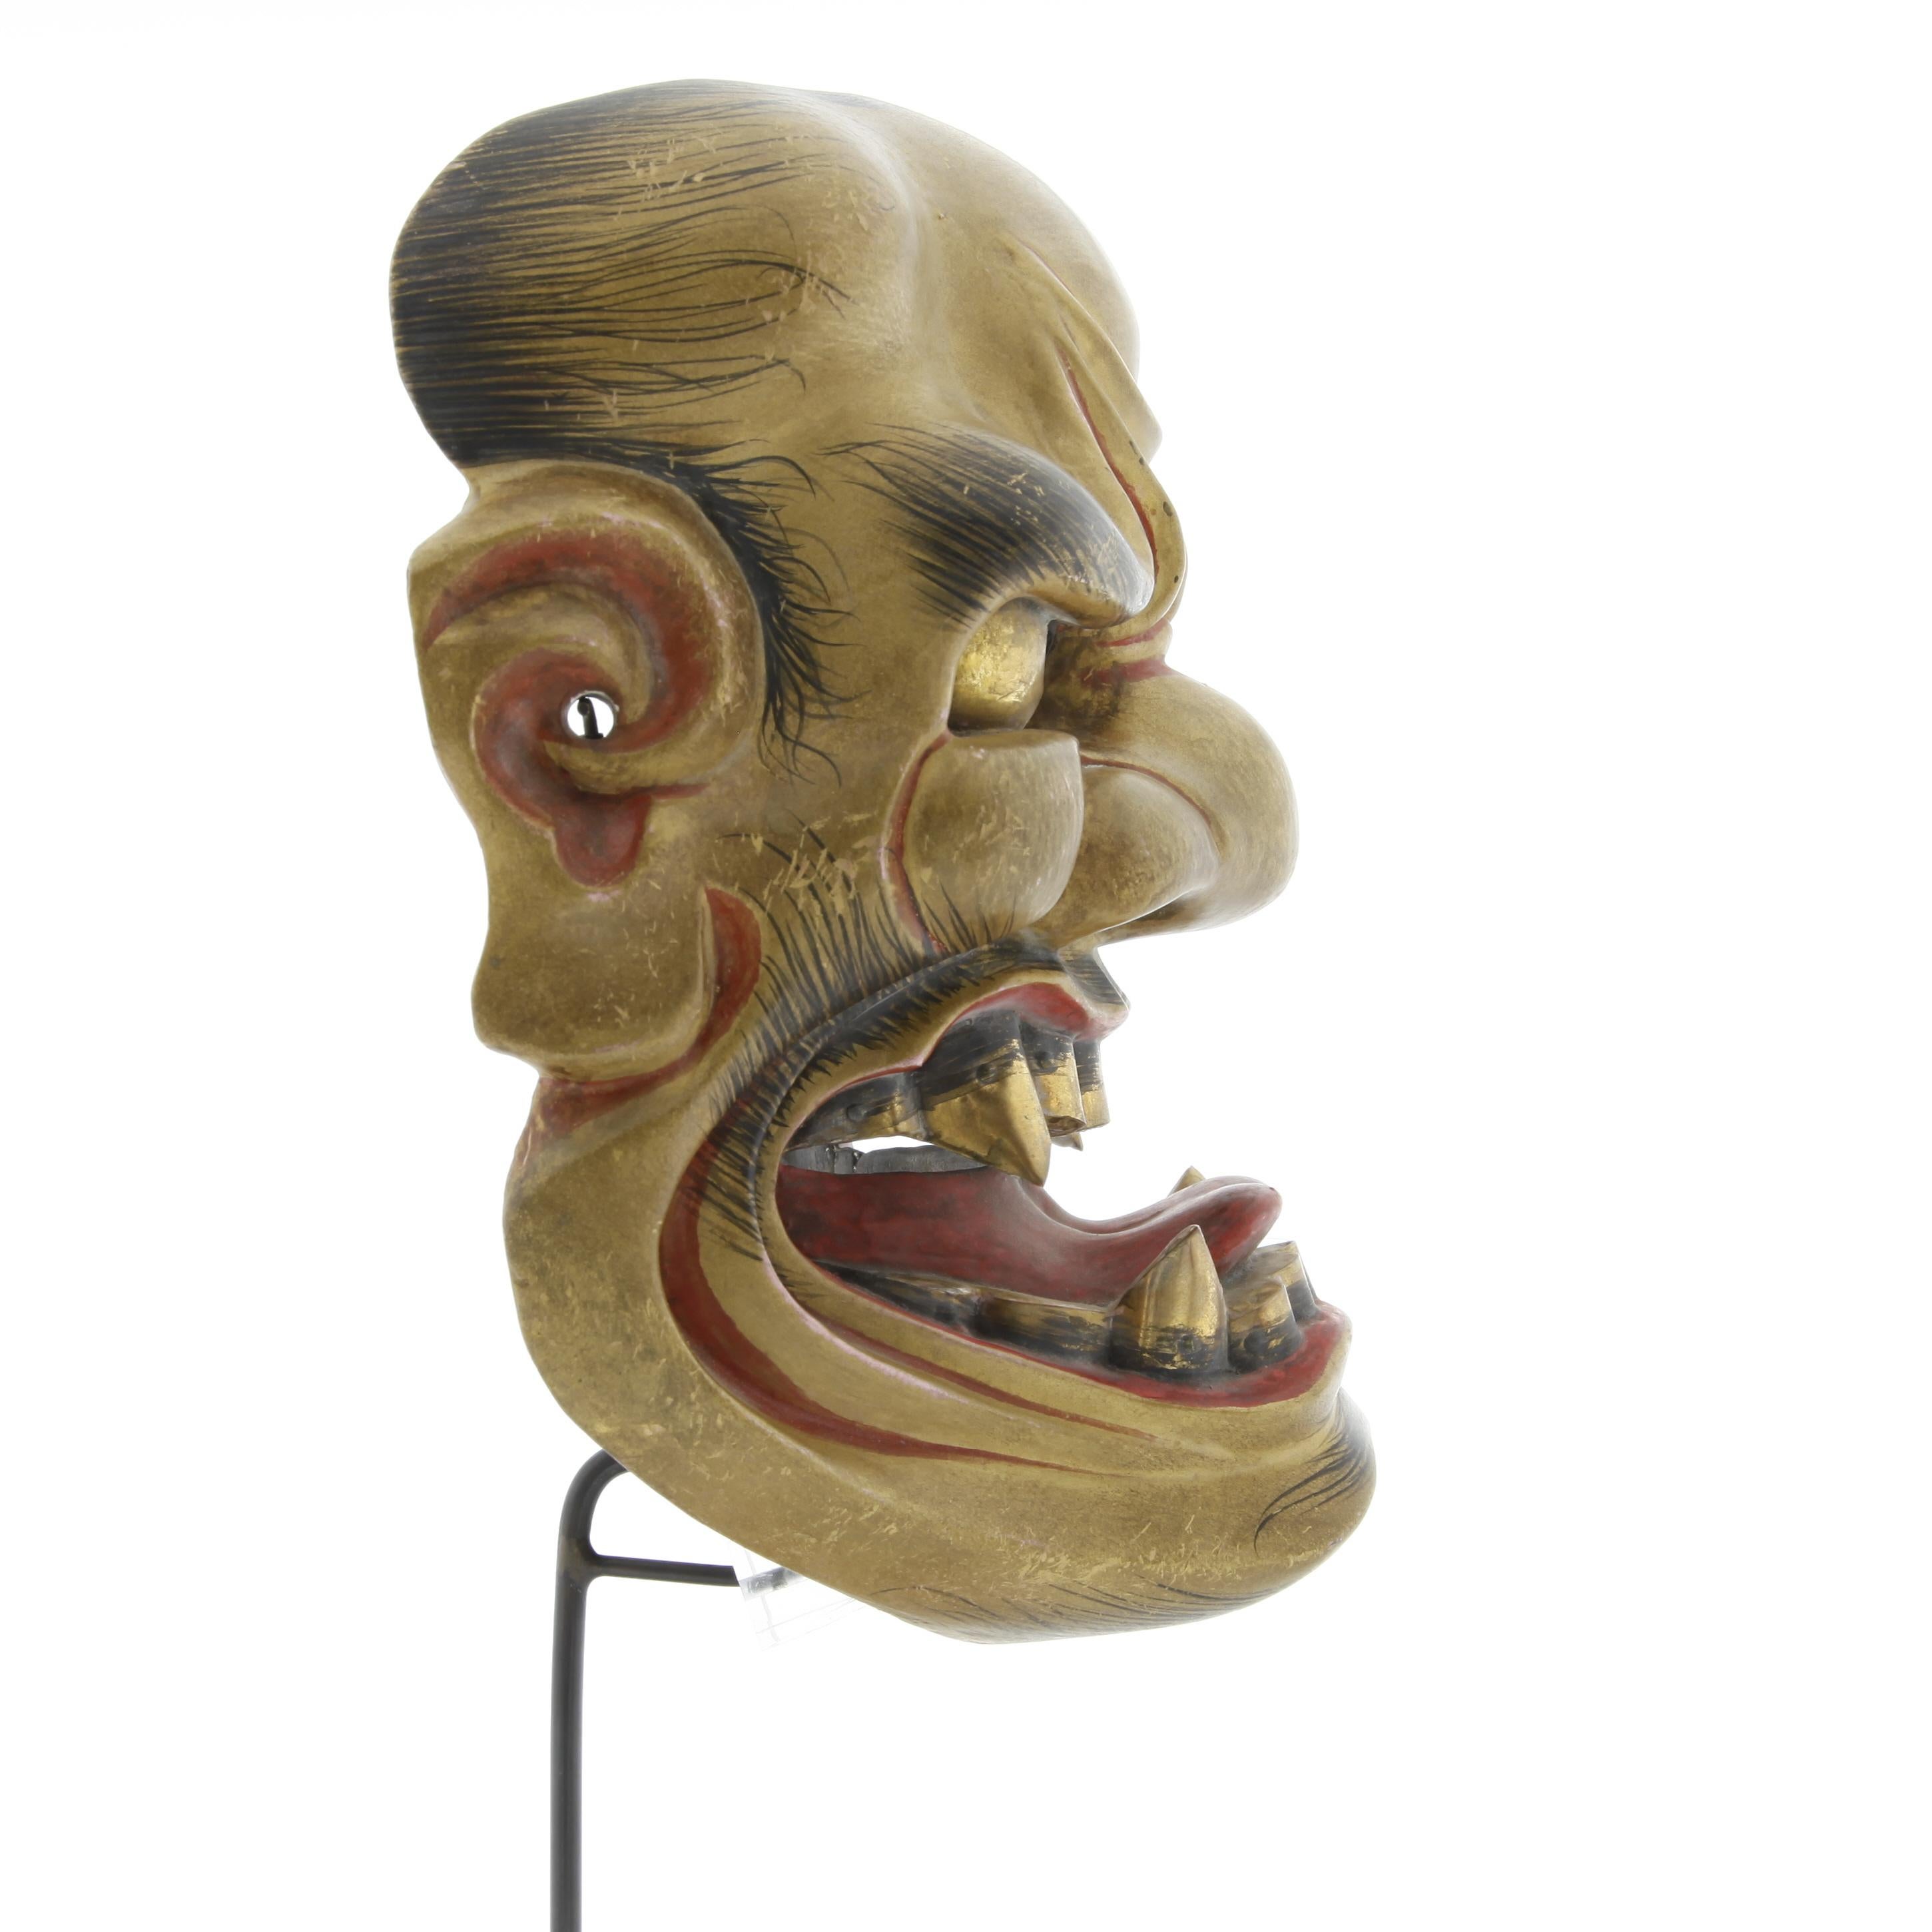 Noh Mask of a Fierce God, Actor, Japanese Theatre, Drama, 19th Century Woodcraft - Brown Figurative Sculpture by Unknown